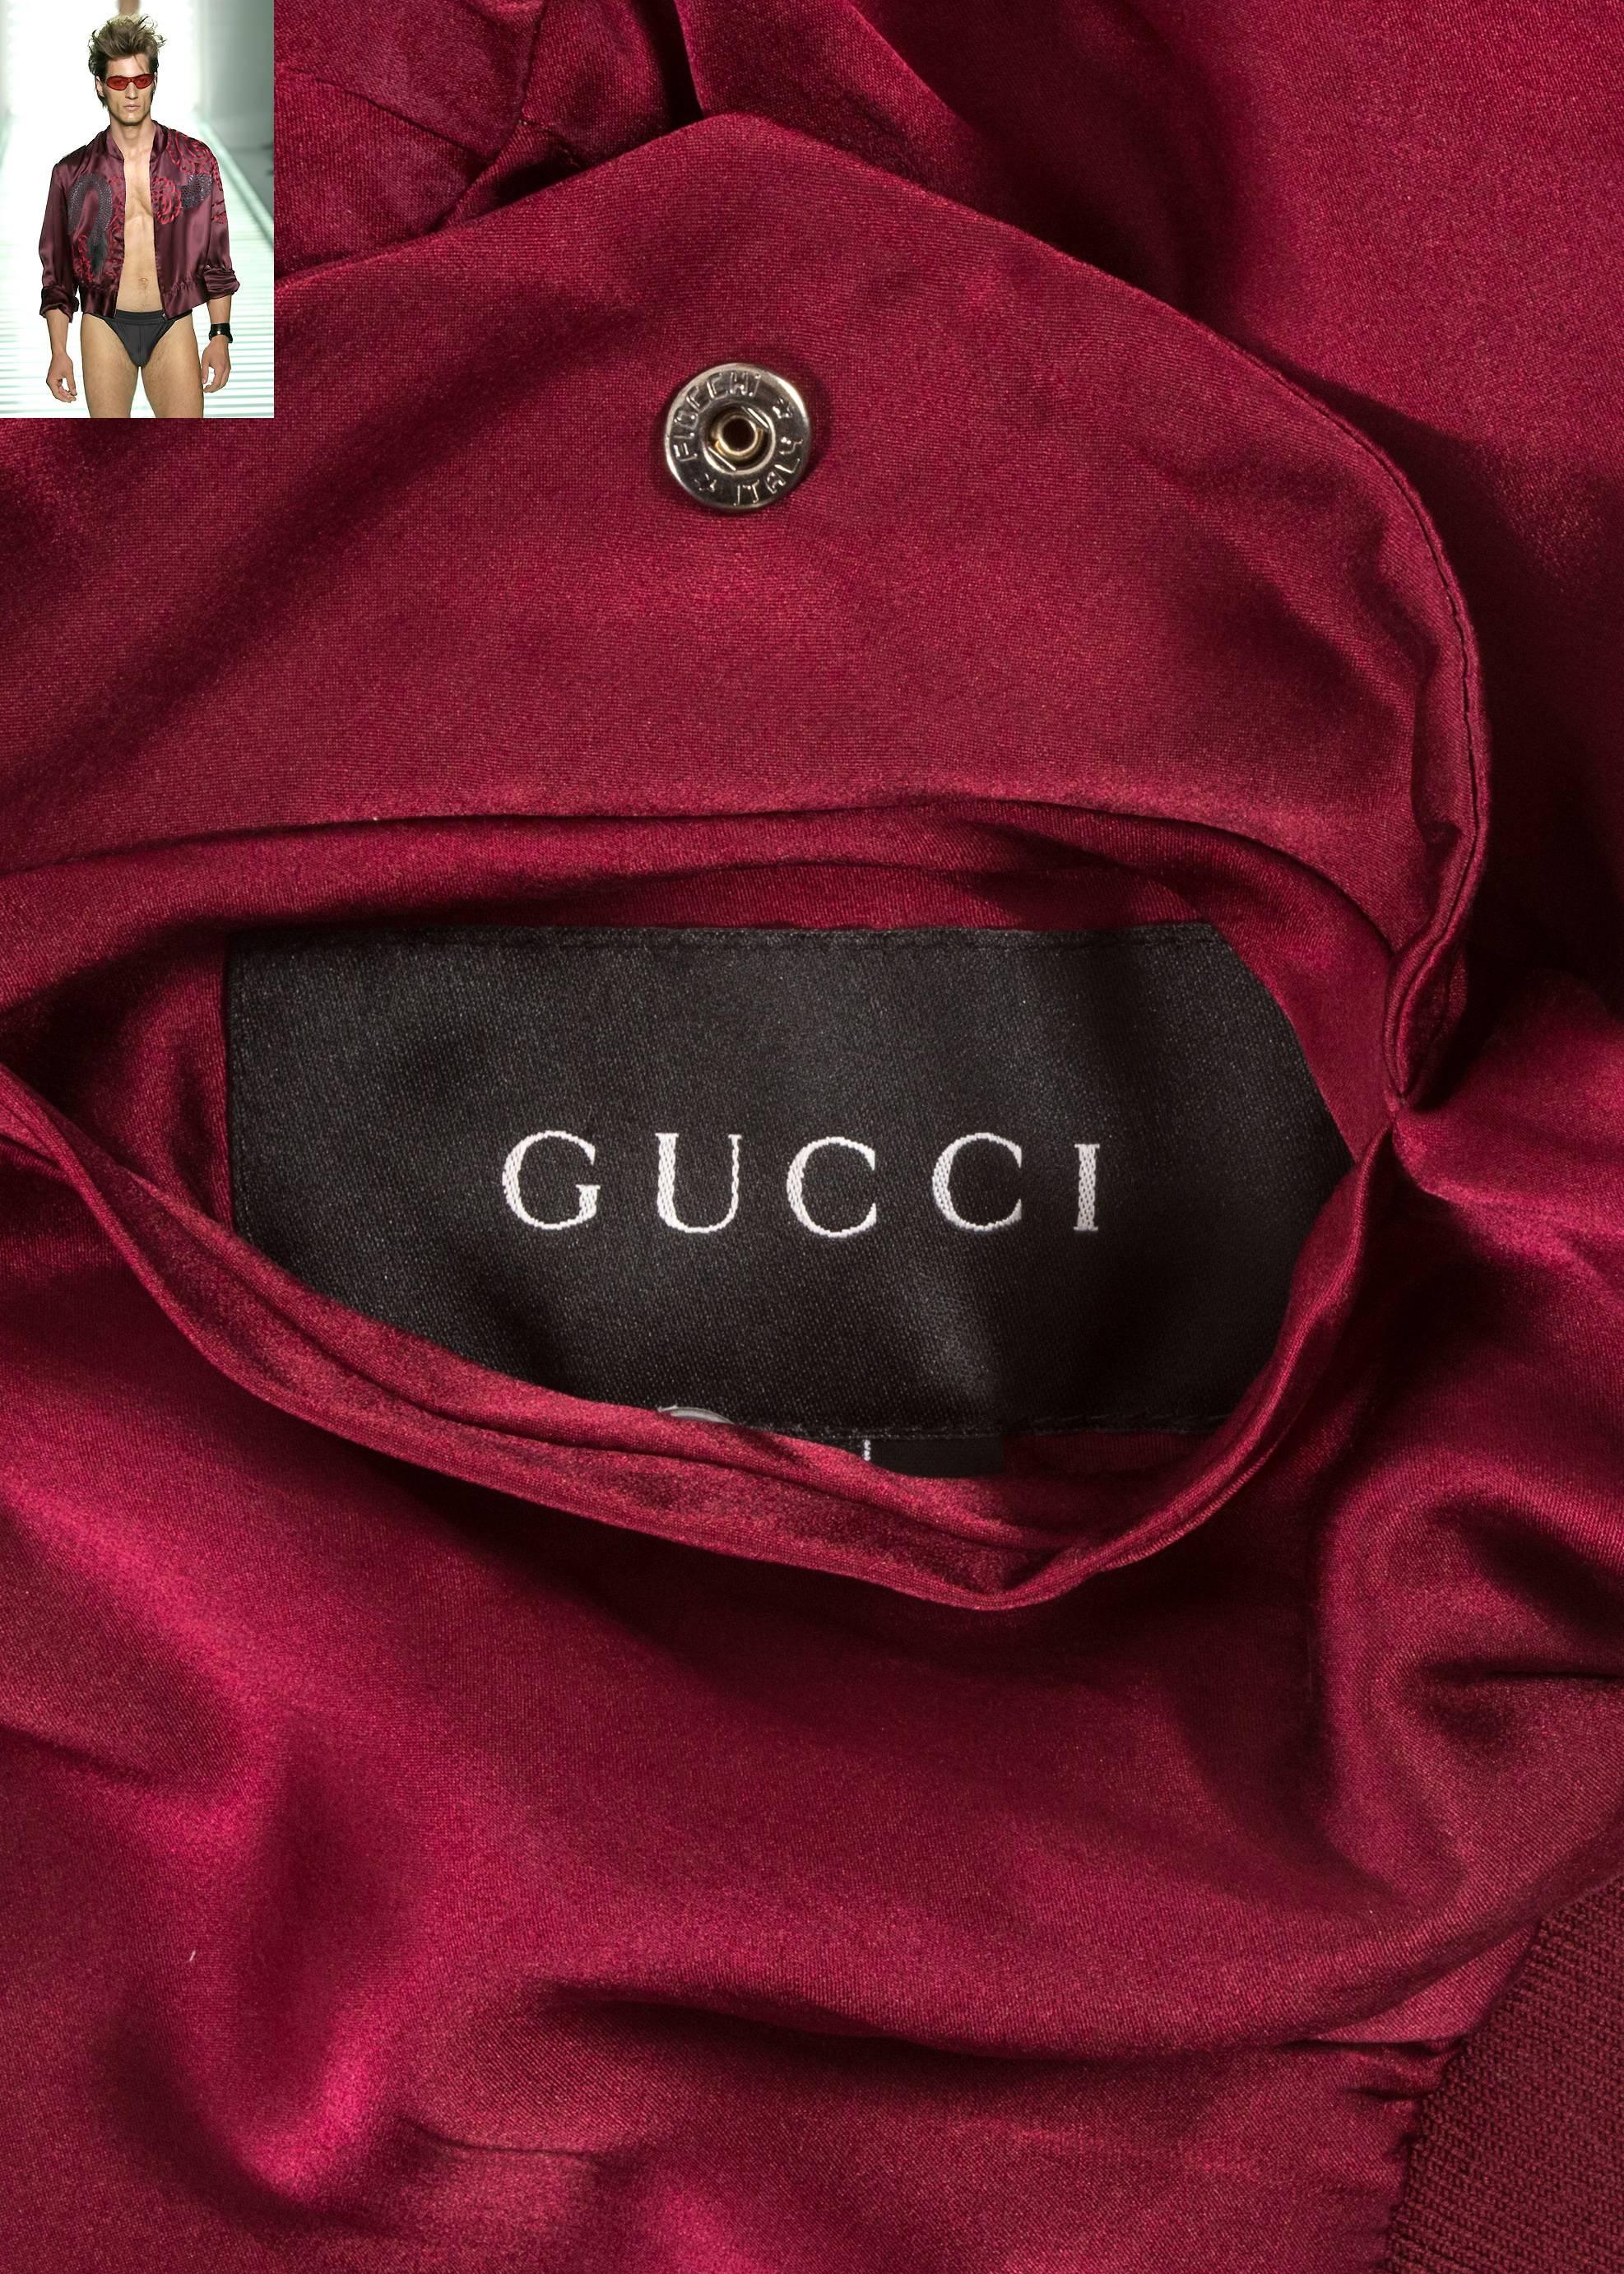 Tom Ford for Gucci unisex reversible embroidered silk jacket, Spring-Summer 2001 4